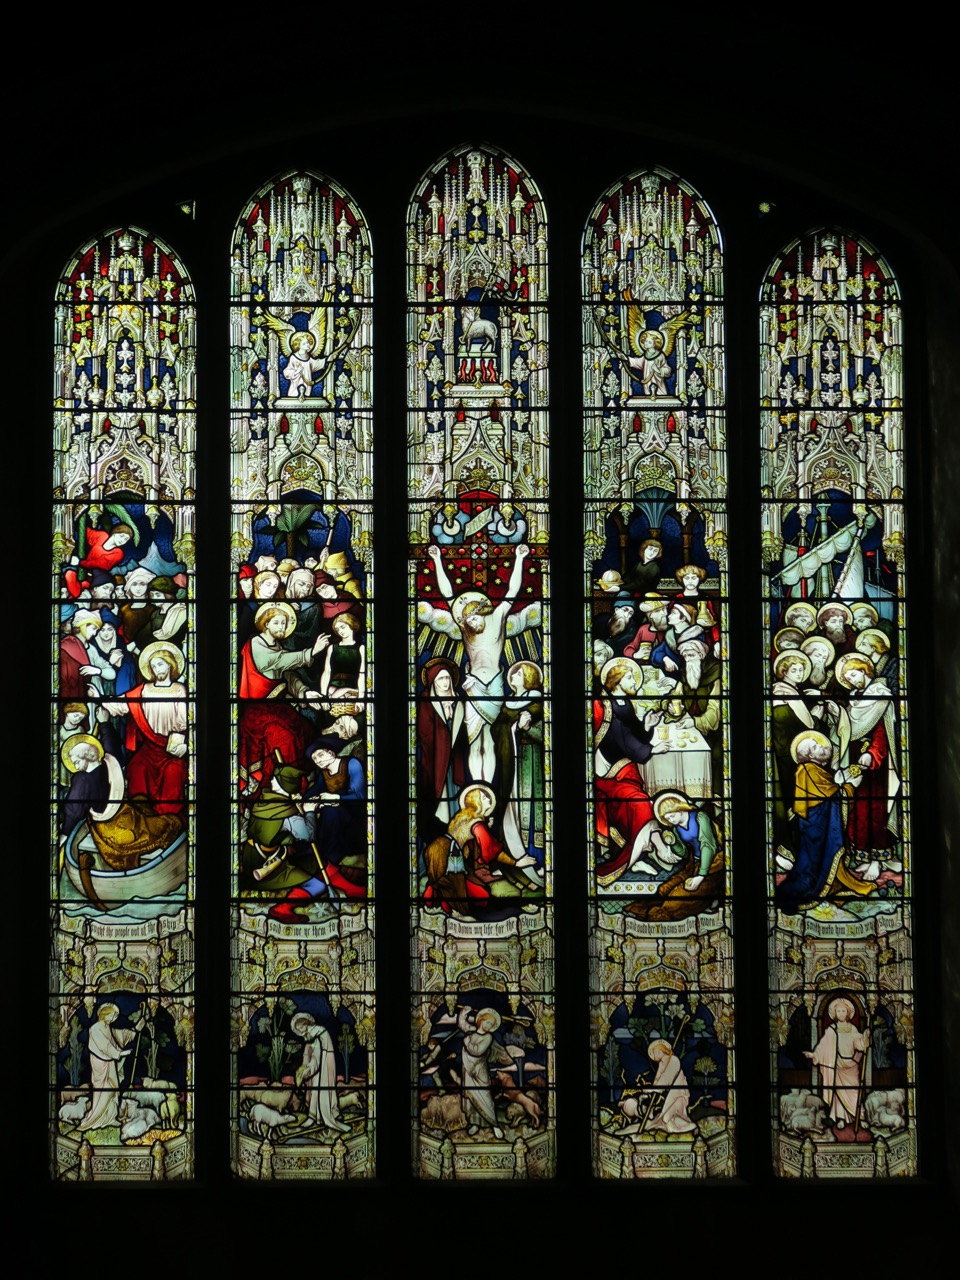 Stained glass window showing scenes from the Gospel